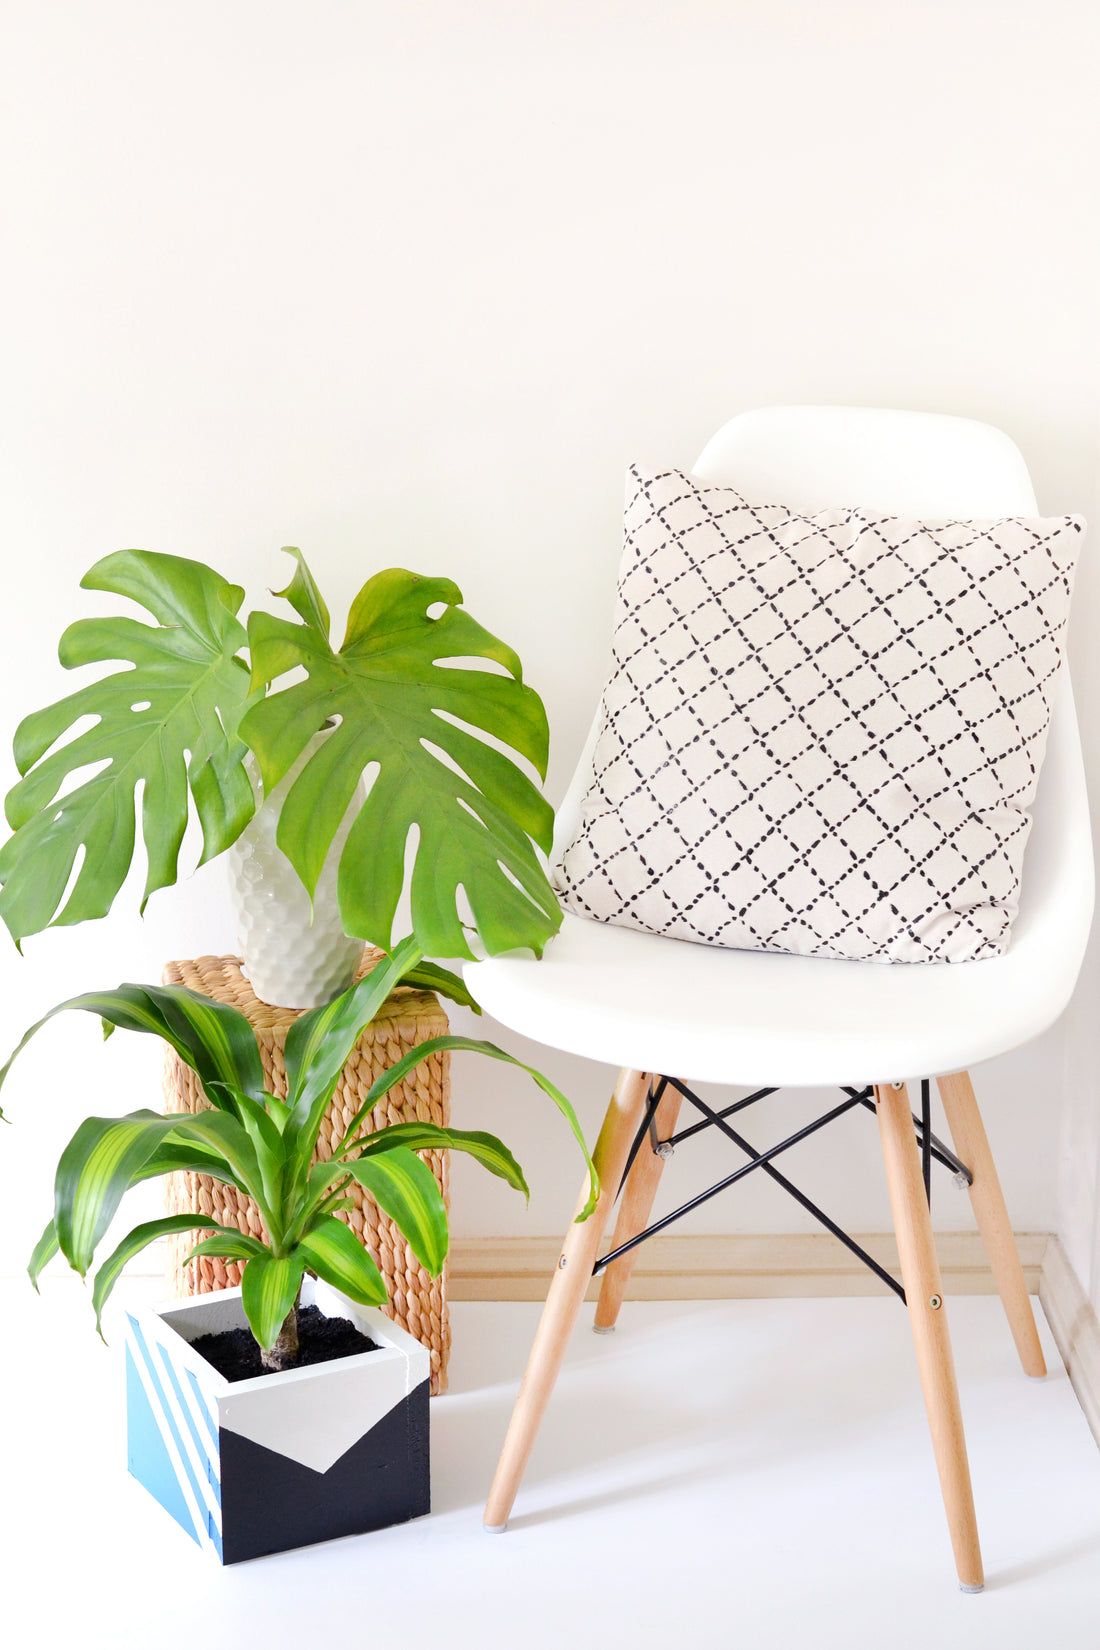 Make your decor | Dashed grid cushion cover